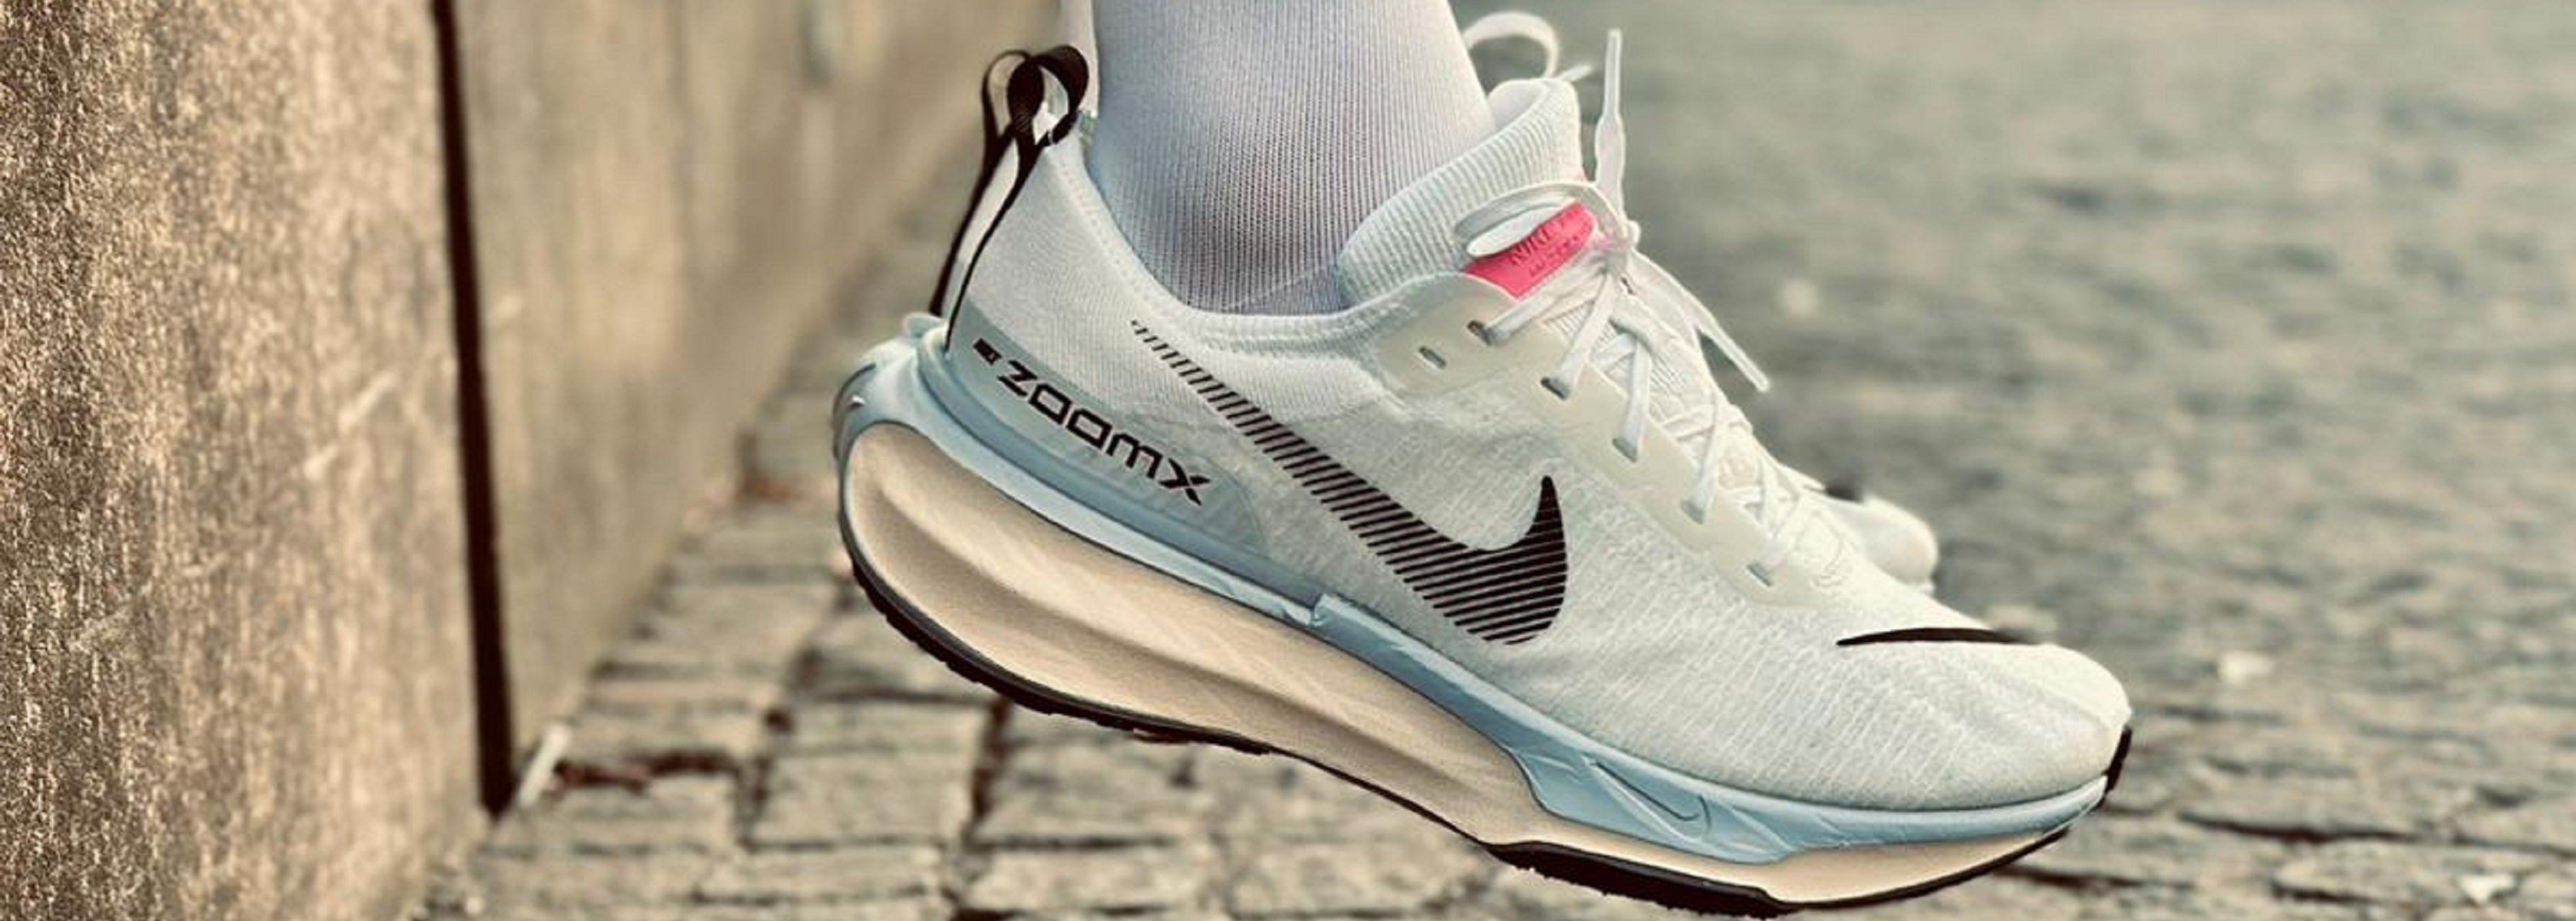 Nike ZoomX Invincible Run 3 Review - Is it worth the hype?